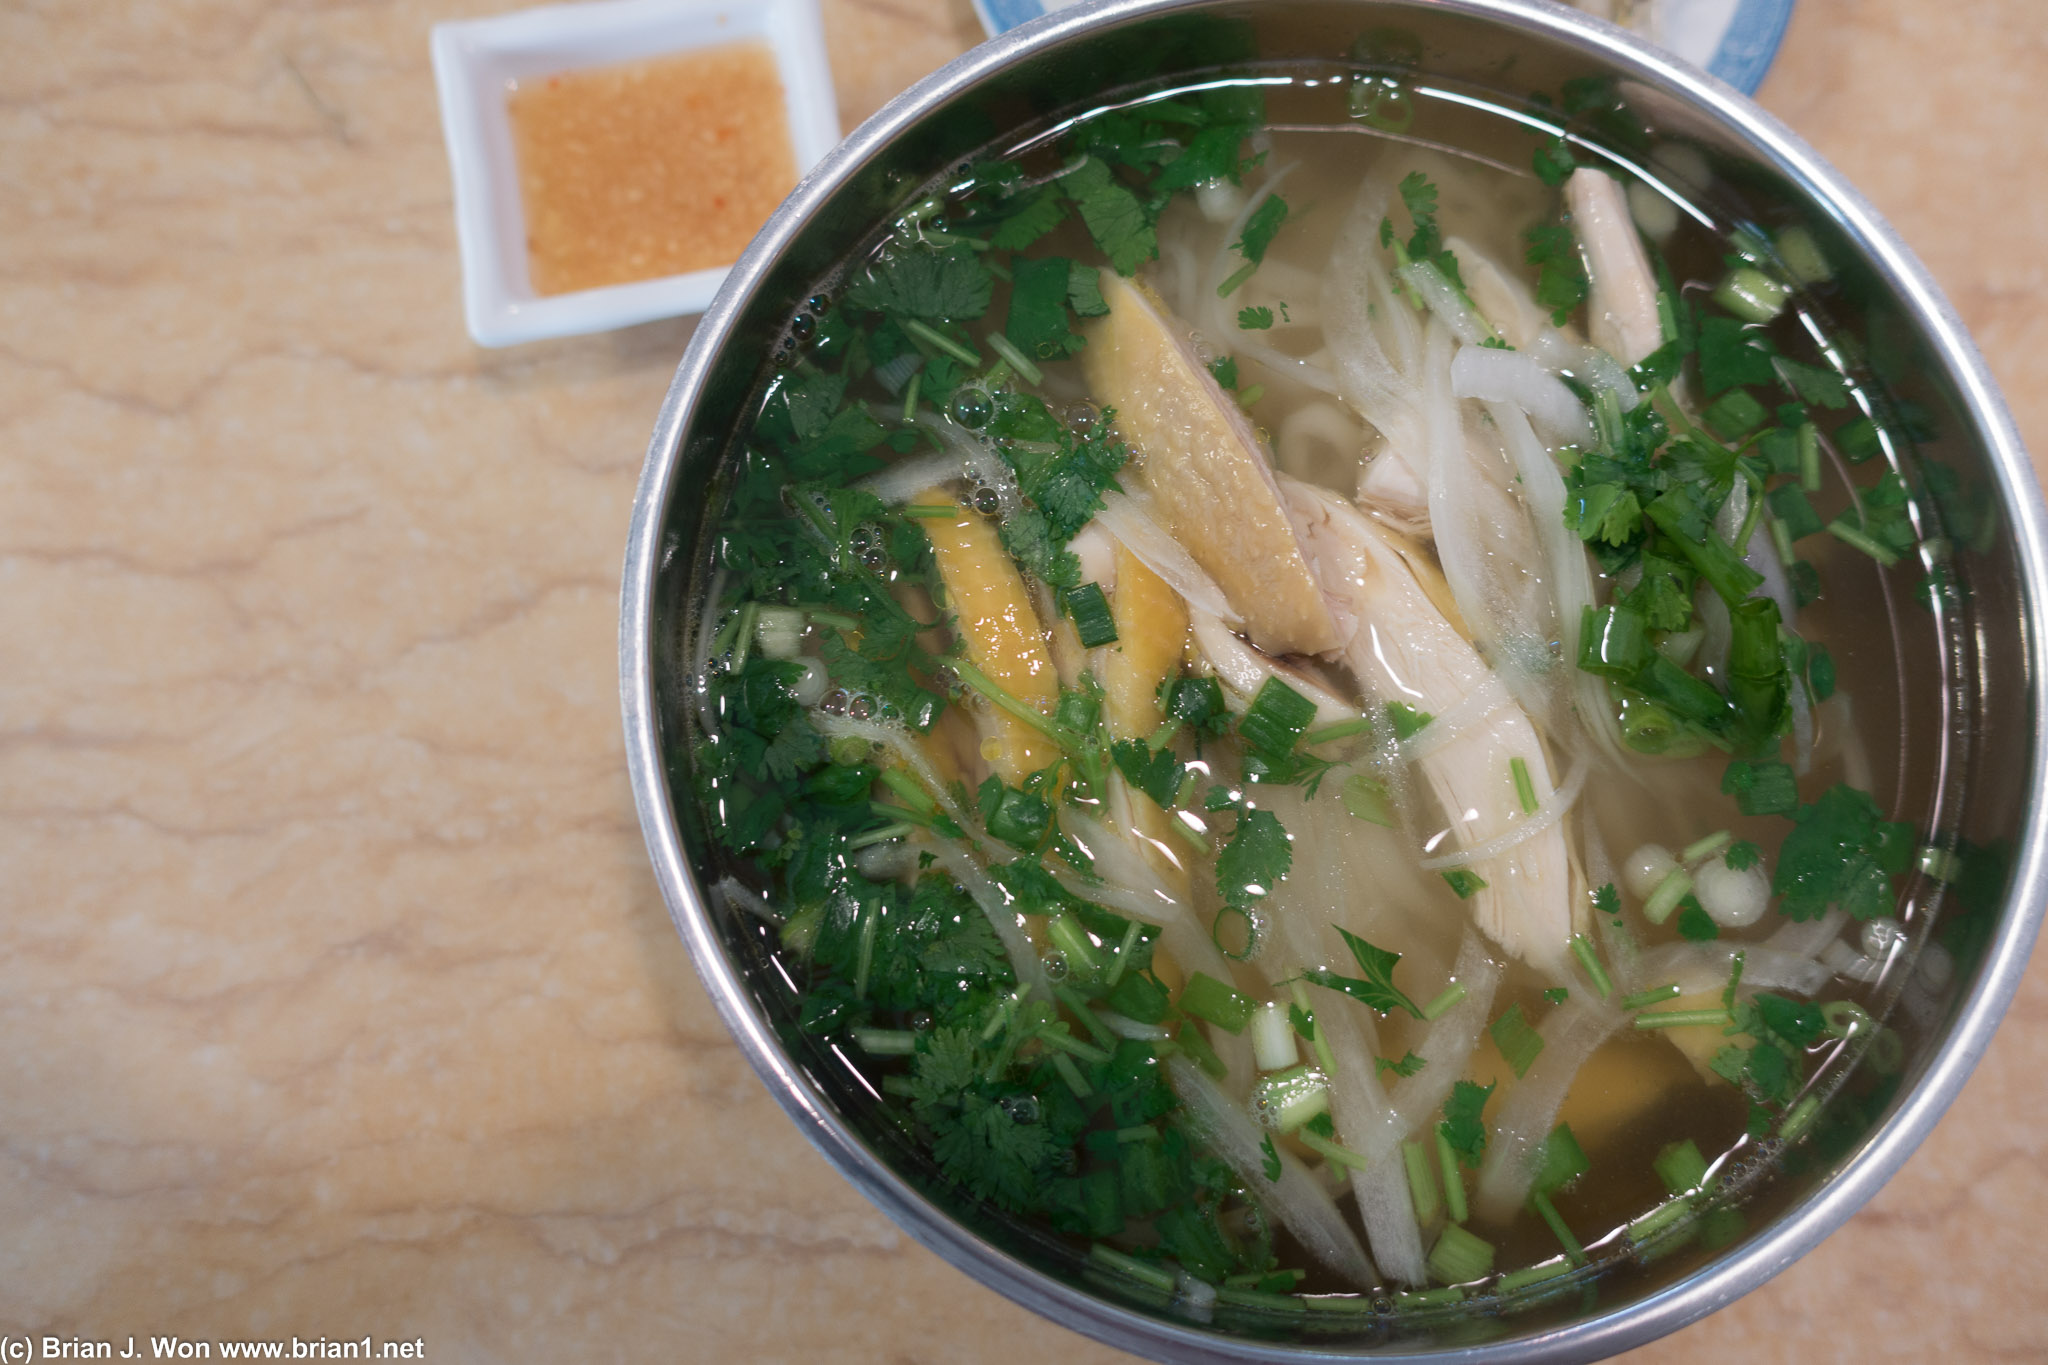 Tasty but I always find the noodles in pho ga too soft. And whoa, metal bowls??